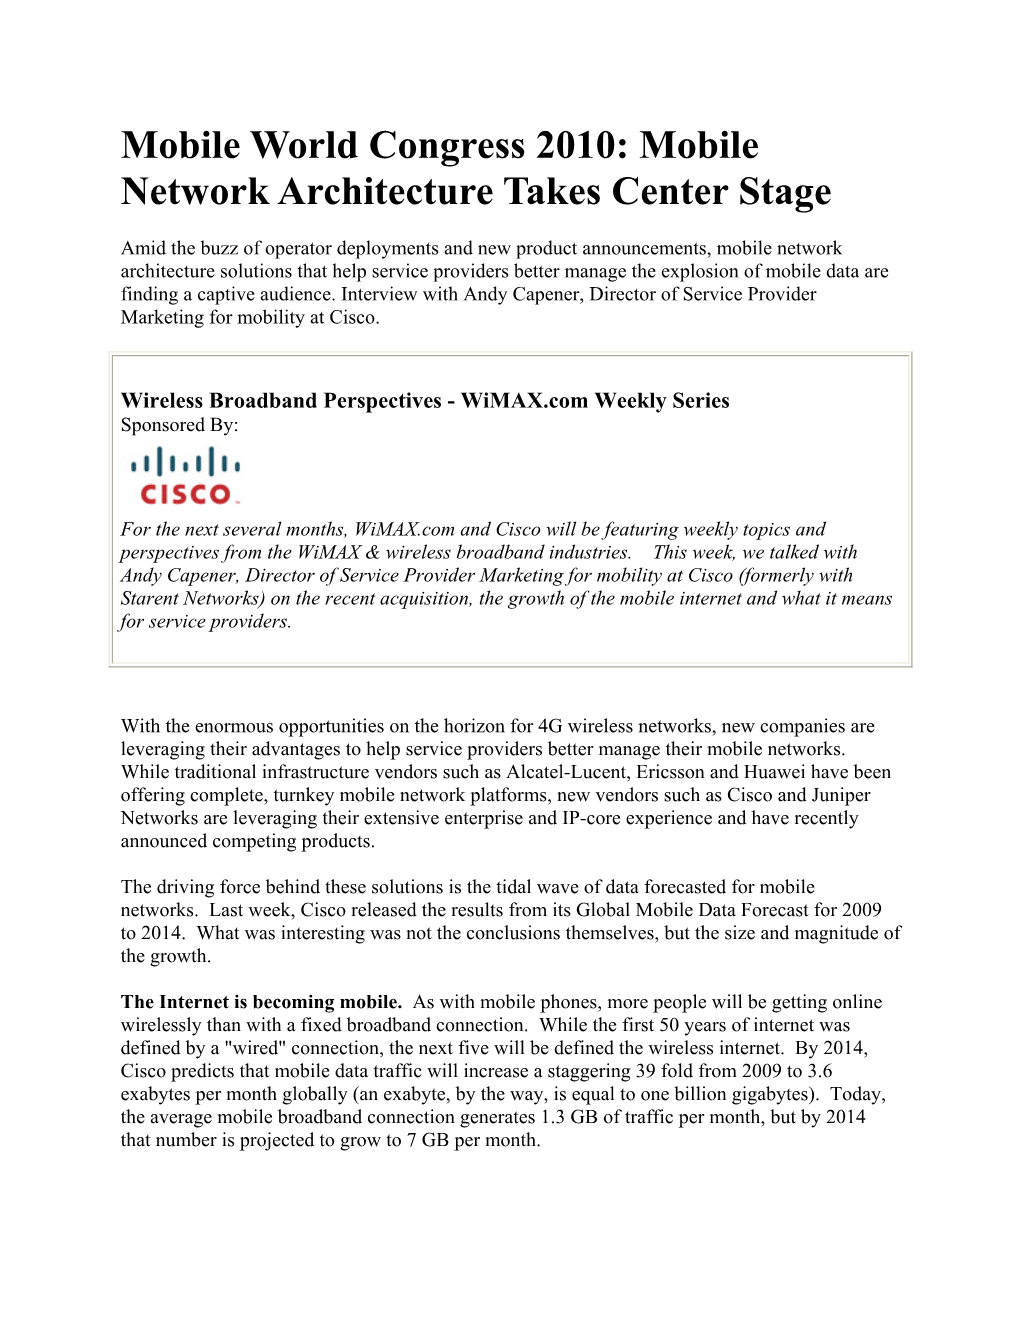 Mobile Network Architecture Takes Center Stage